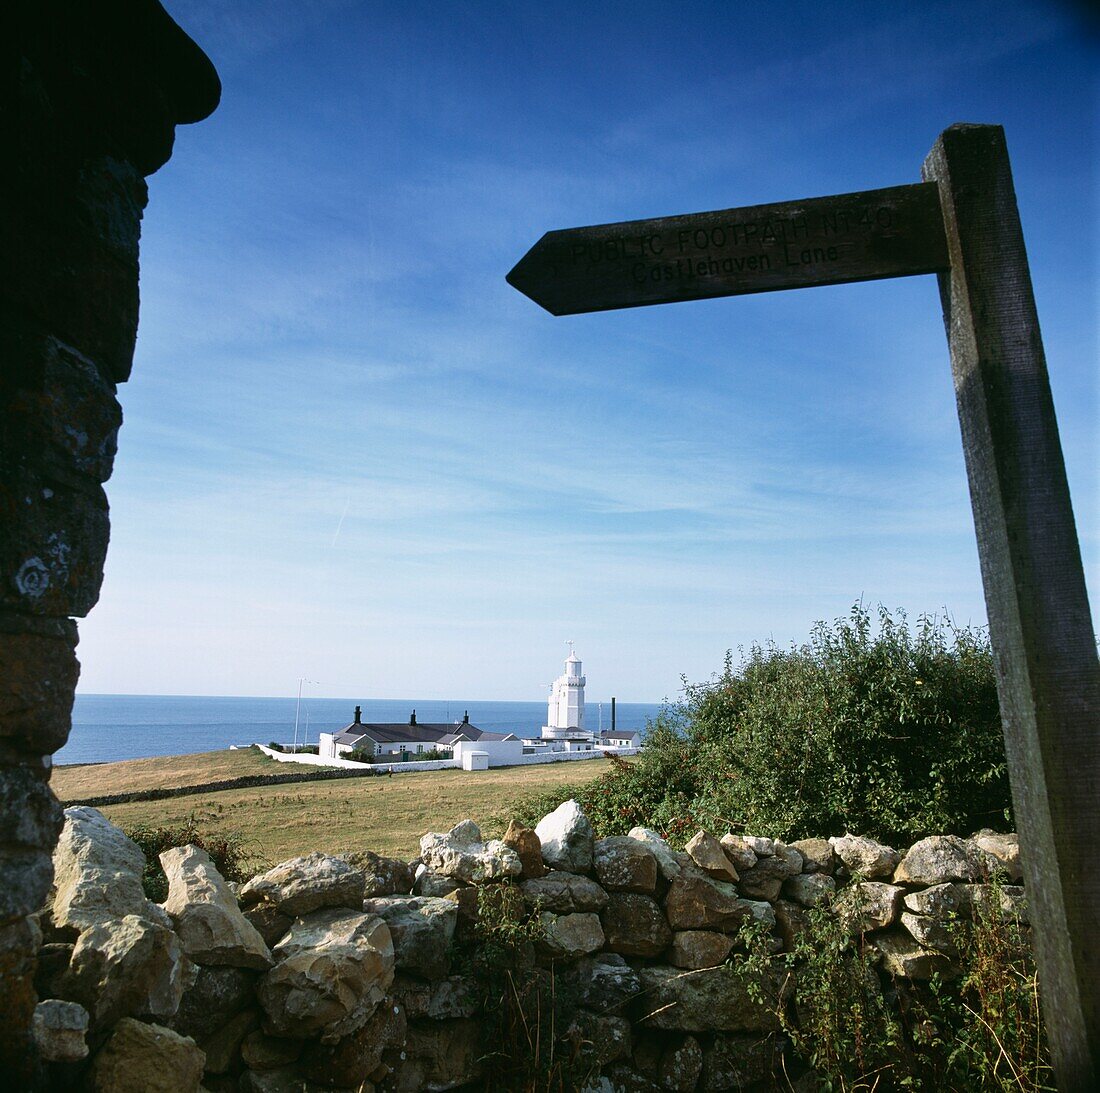 Coastal lighthouse viewed from a stone wall with road sign